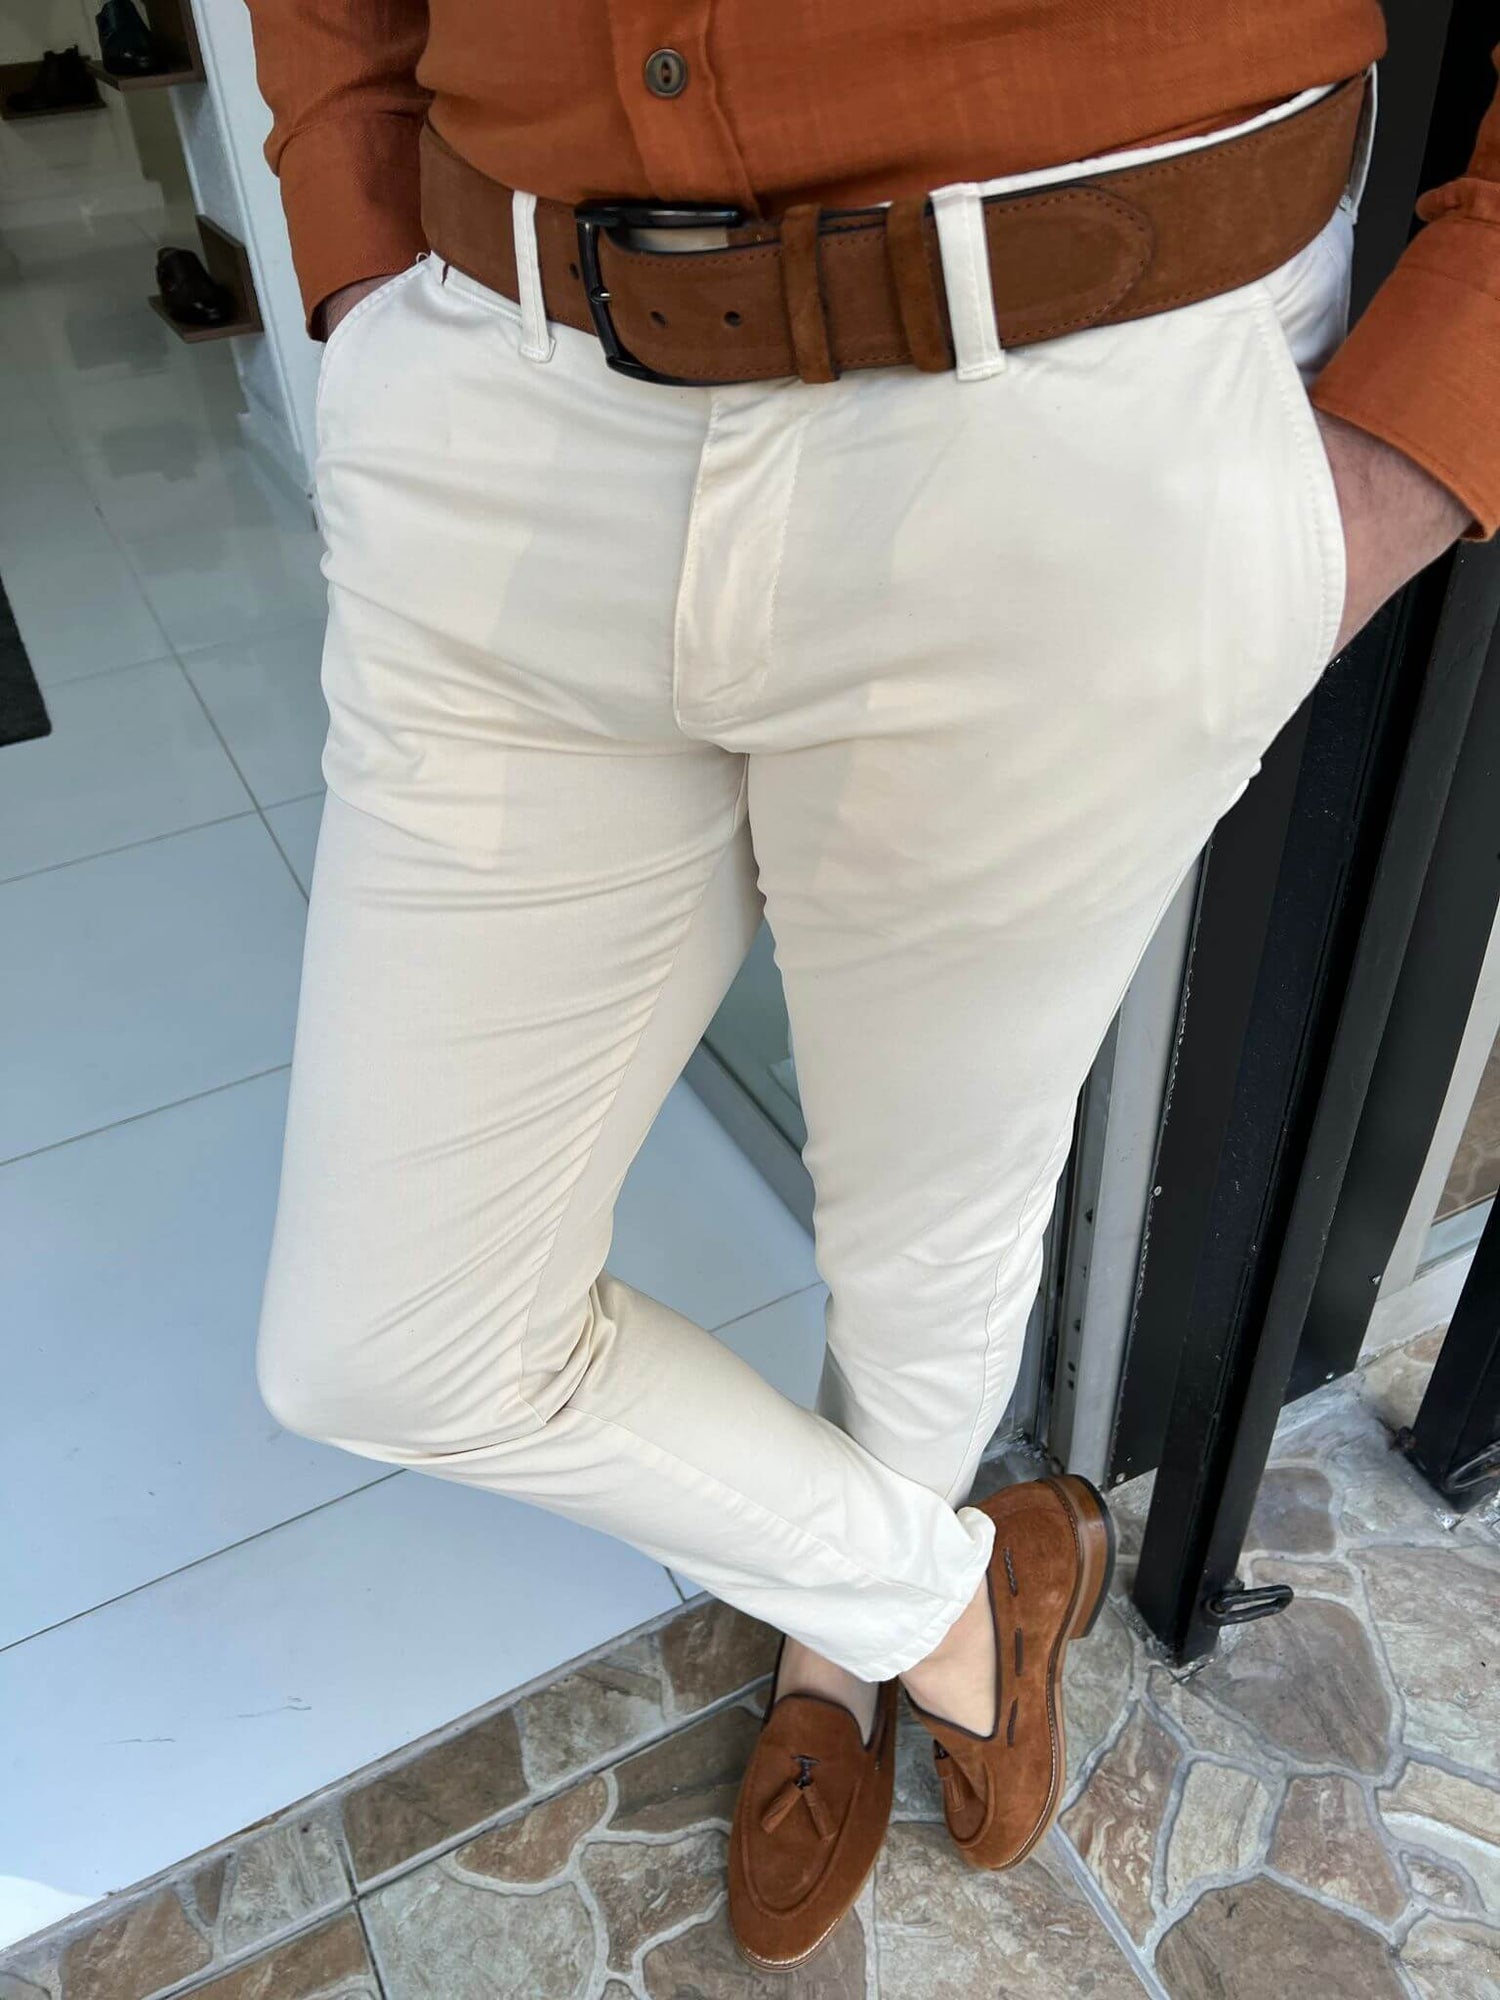 Elegant cream pants with a tailored fit for a sophisticated look